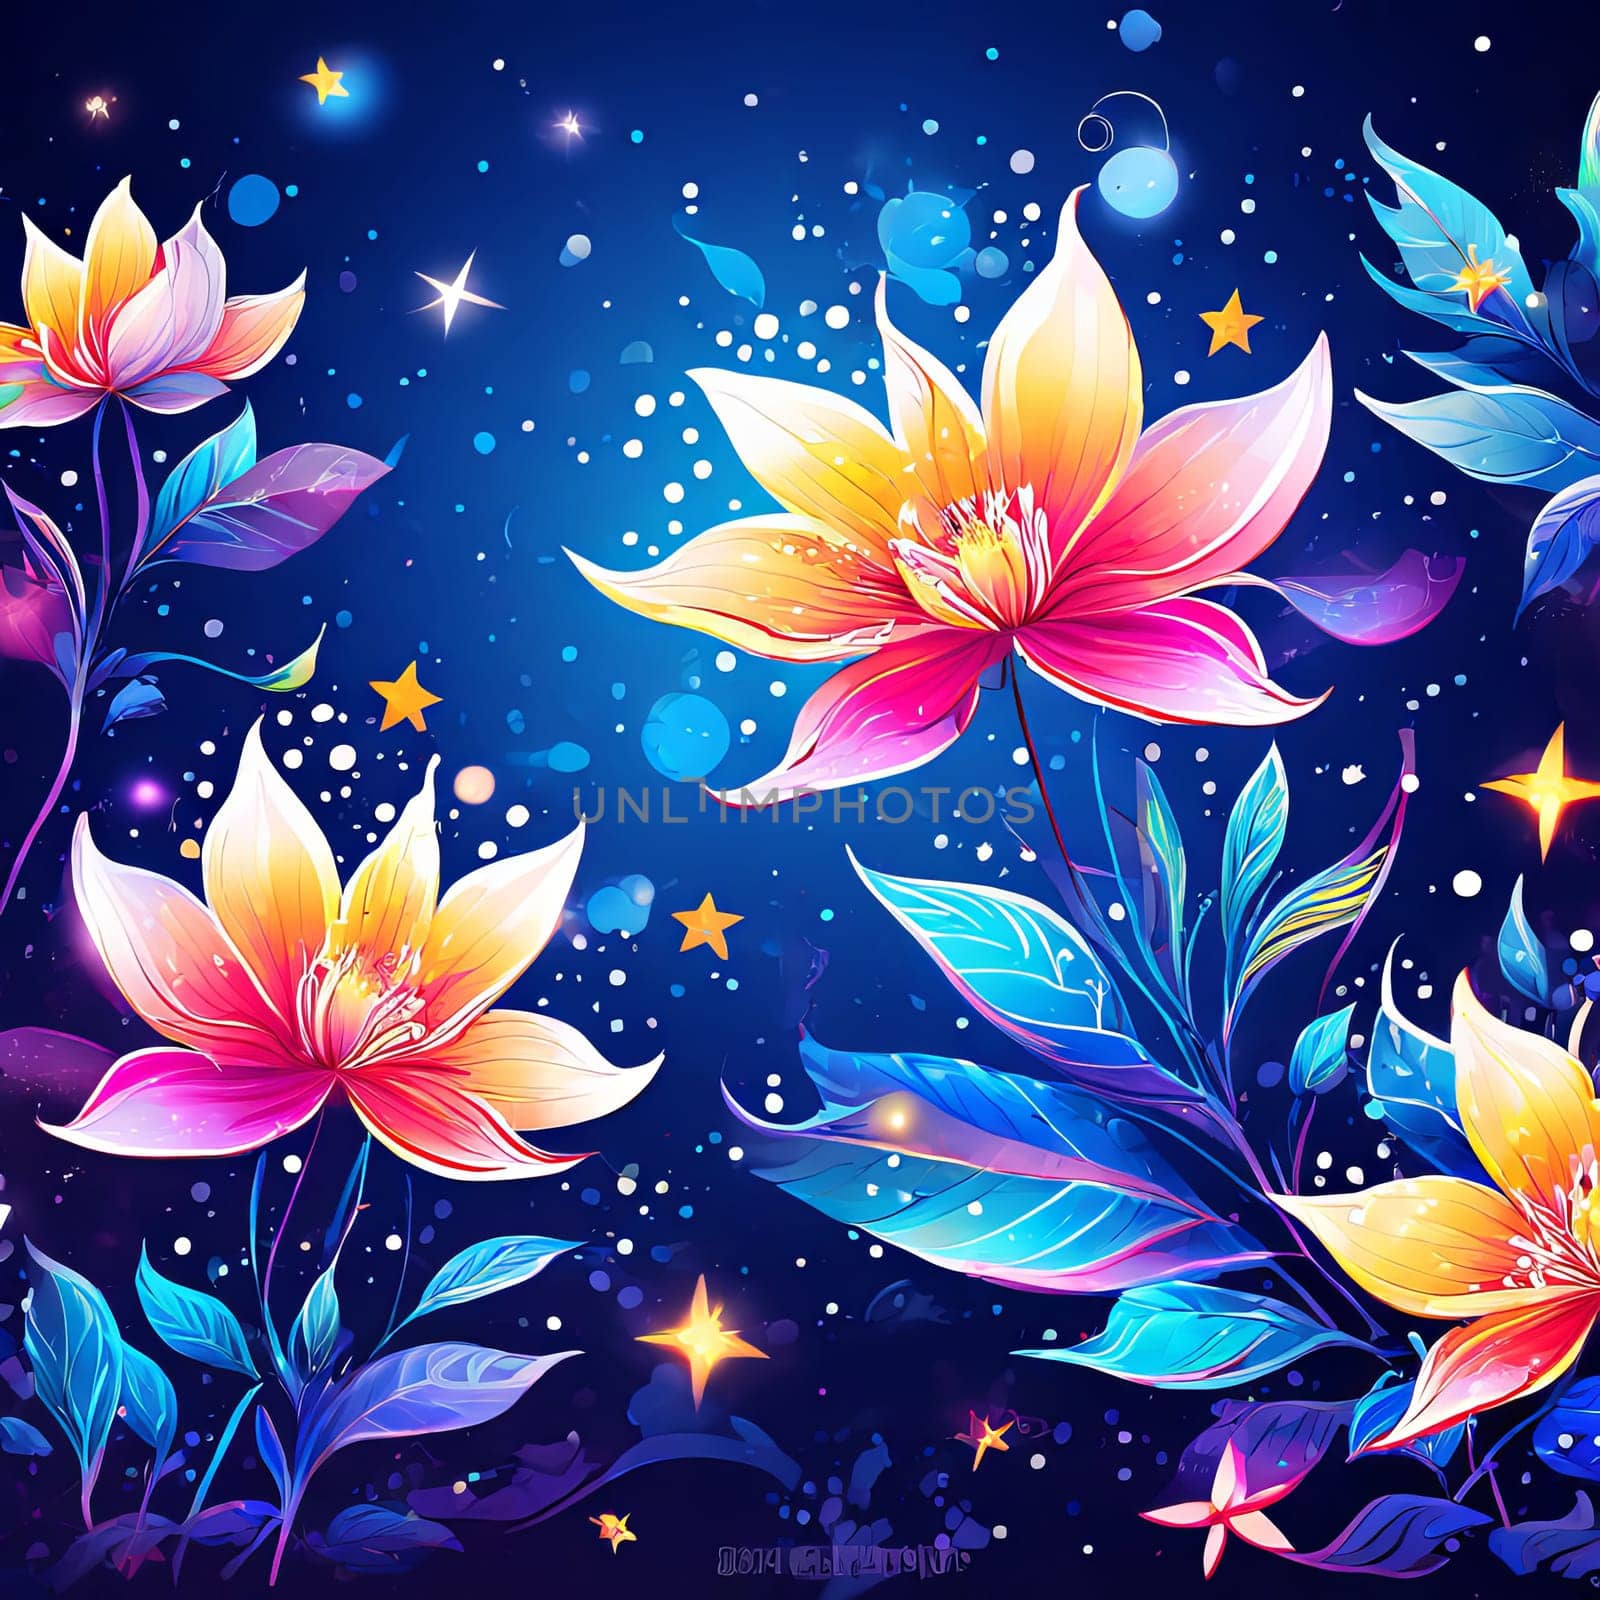 Serene lotus flowers on blue background adorned with stars. Starry background adds sense of mystery, magic to overall impression of image. For art, creative projects, fashion, style, social media